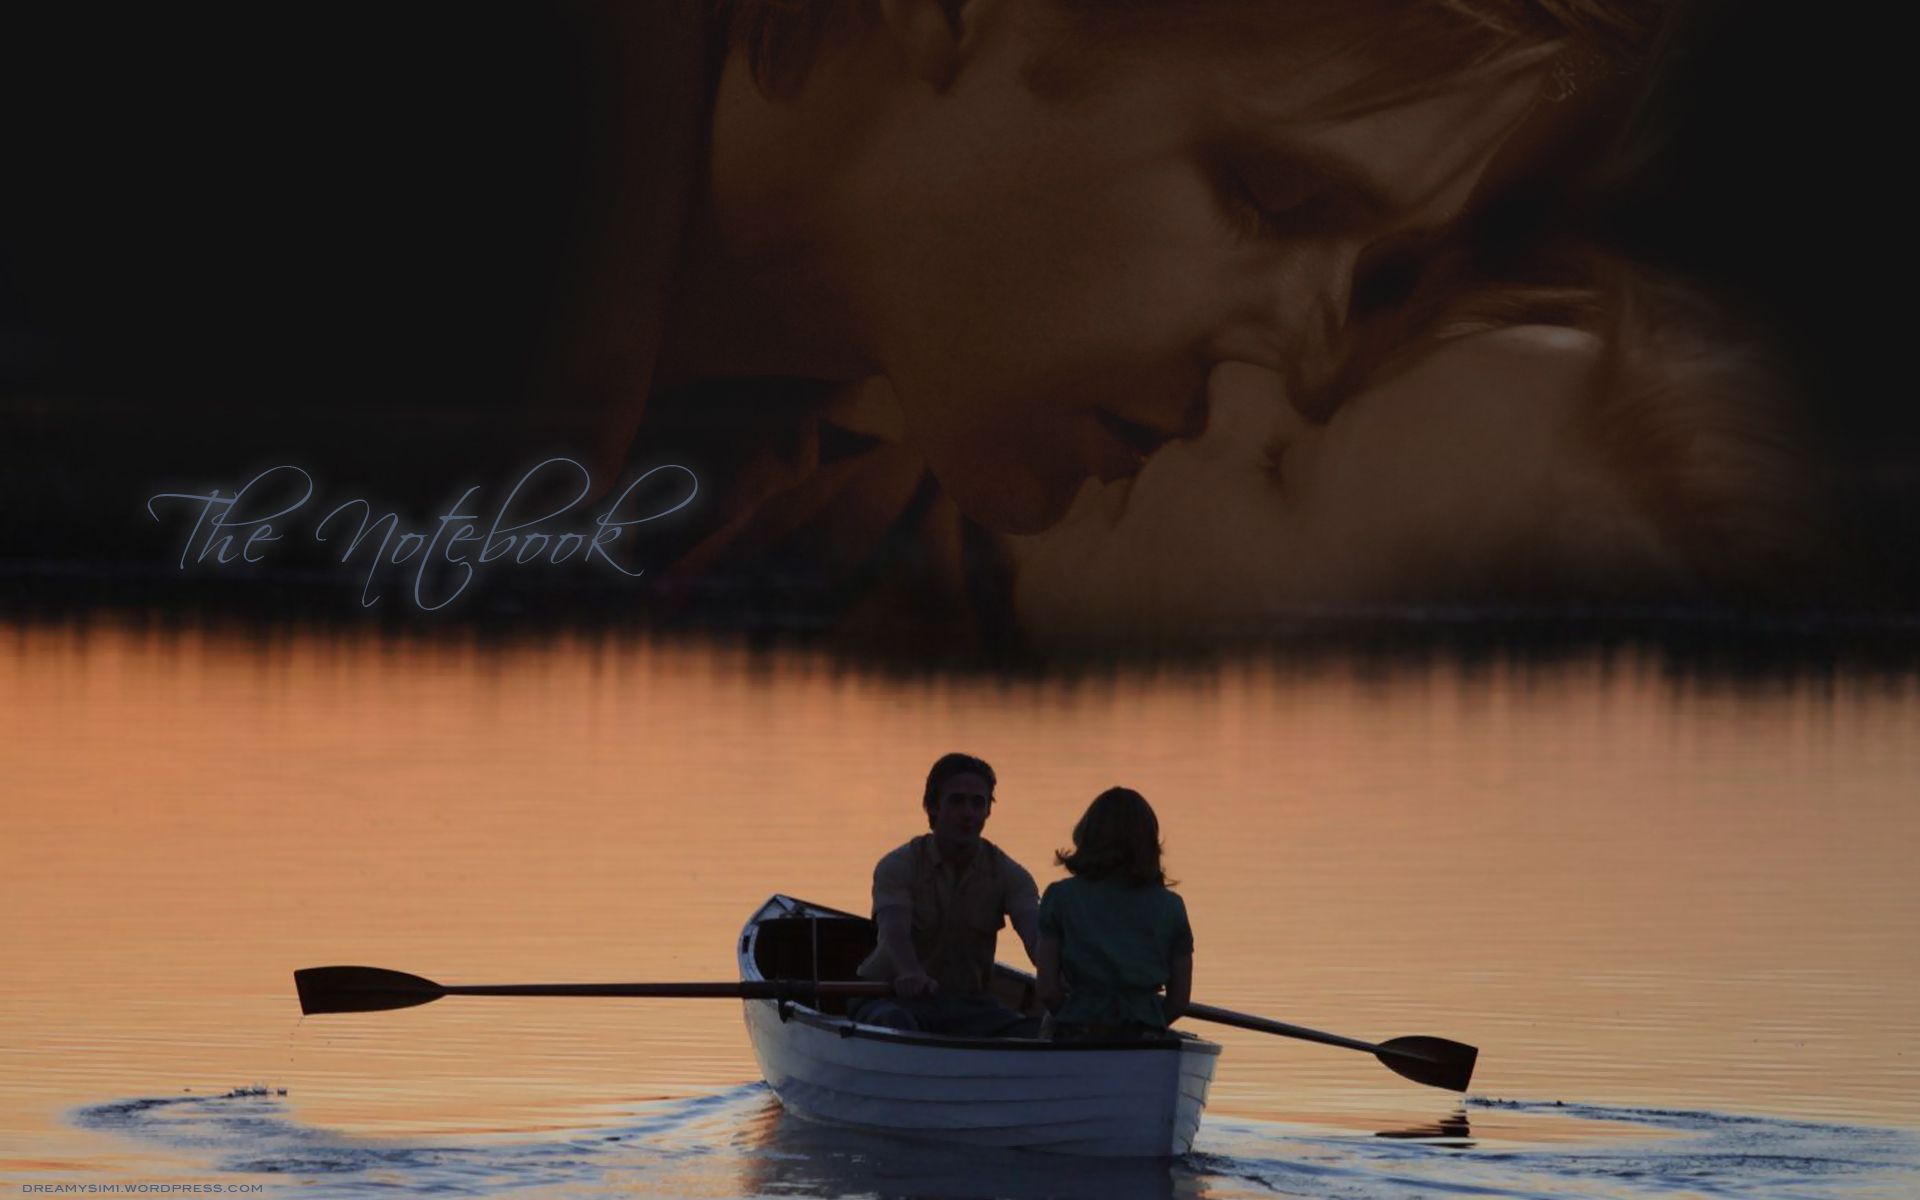 wallpaper The Notebook – kiss | In my dreams...